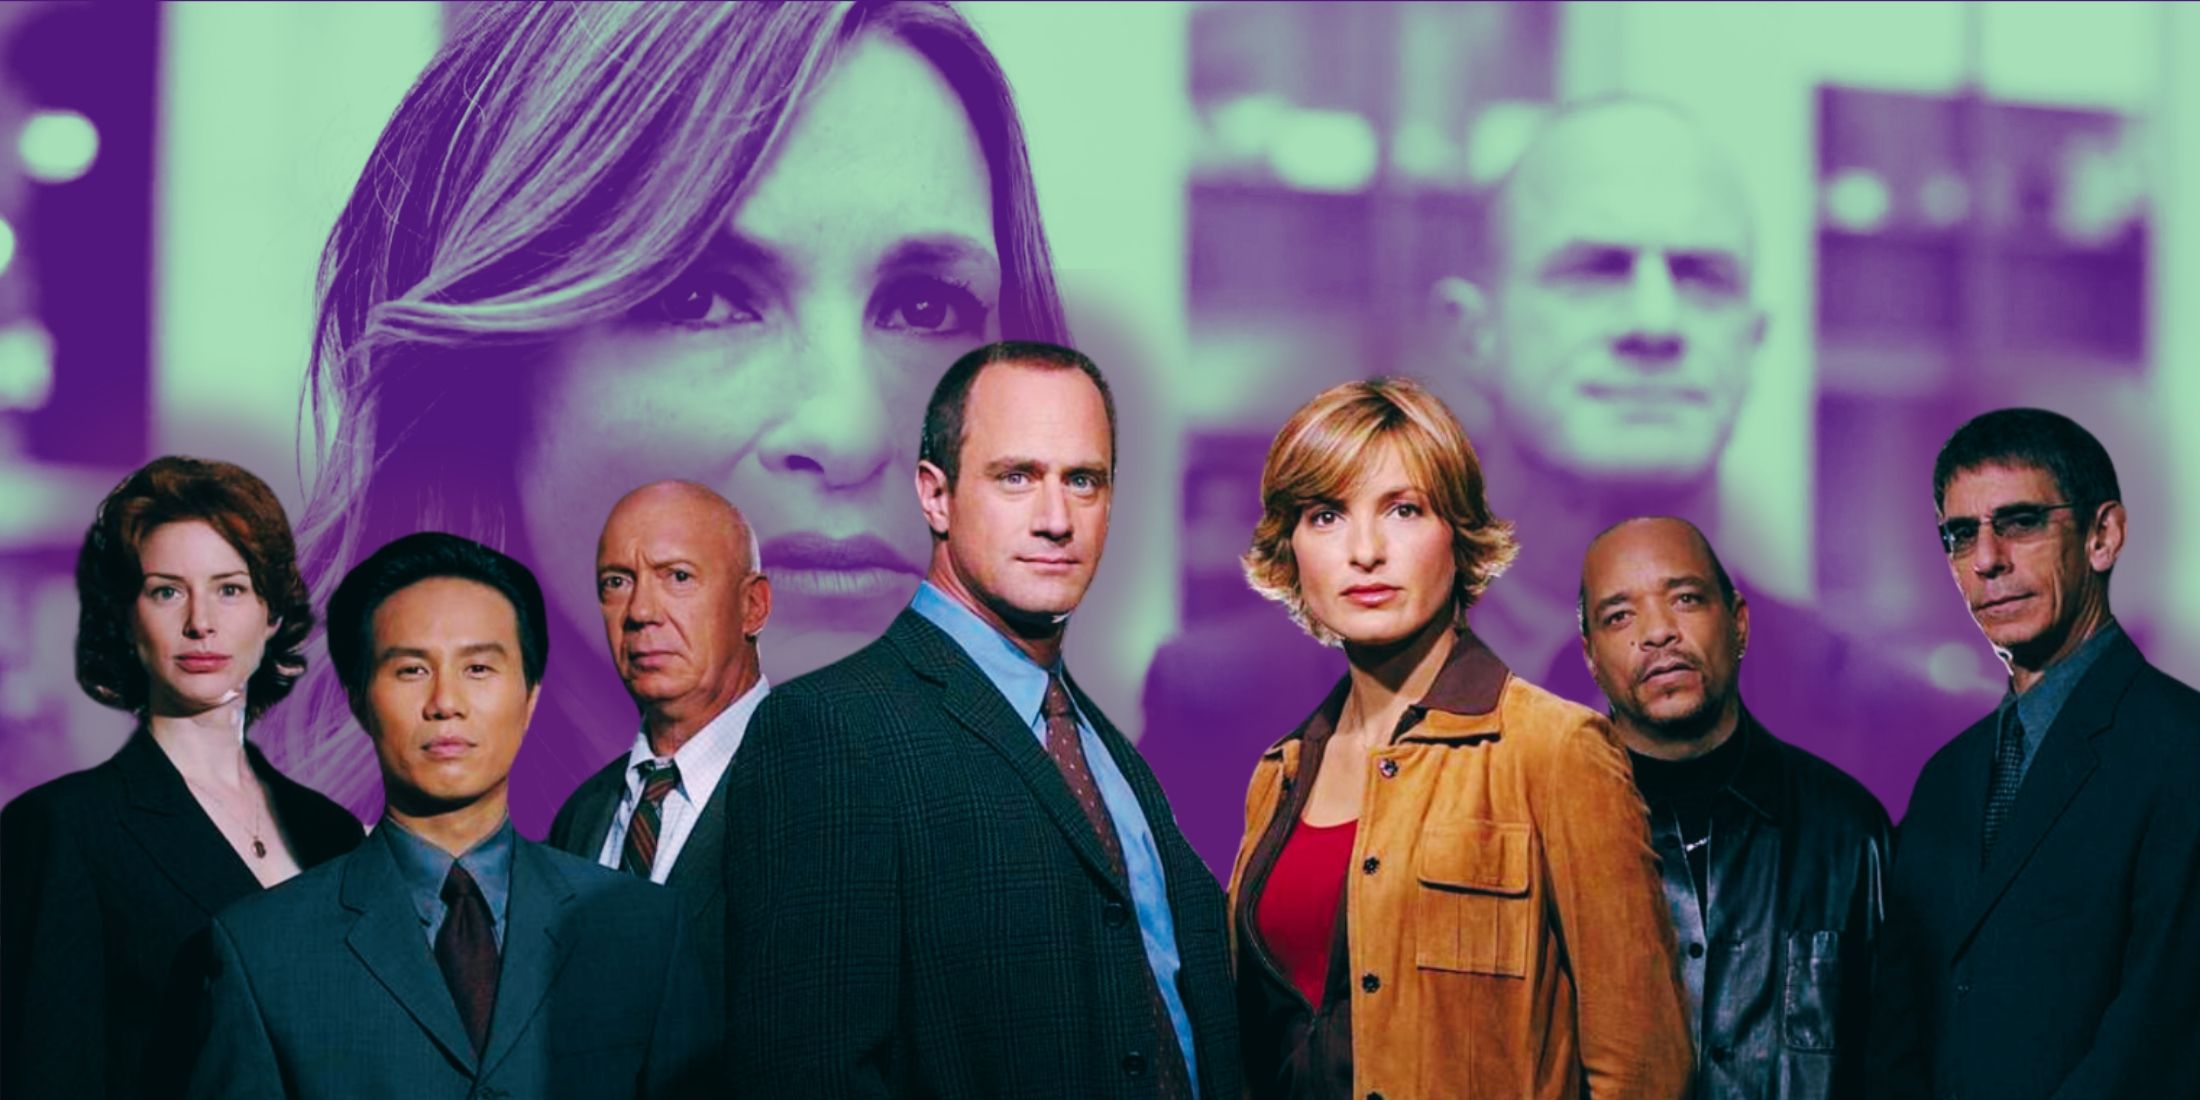 The Law & Order SVU cast of season 7 over an image of Benson and Stabler from season 22 tinted green